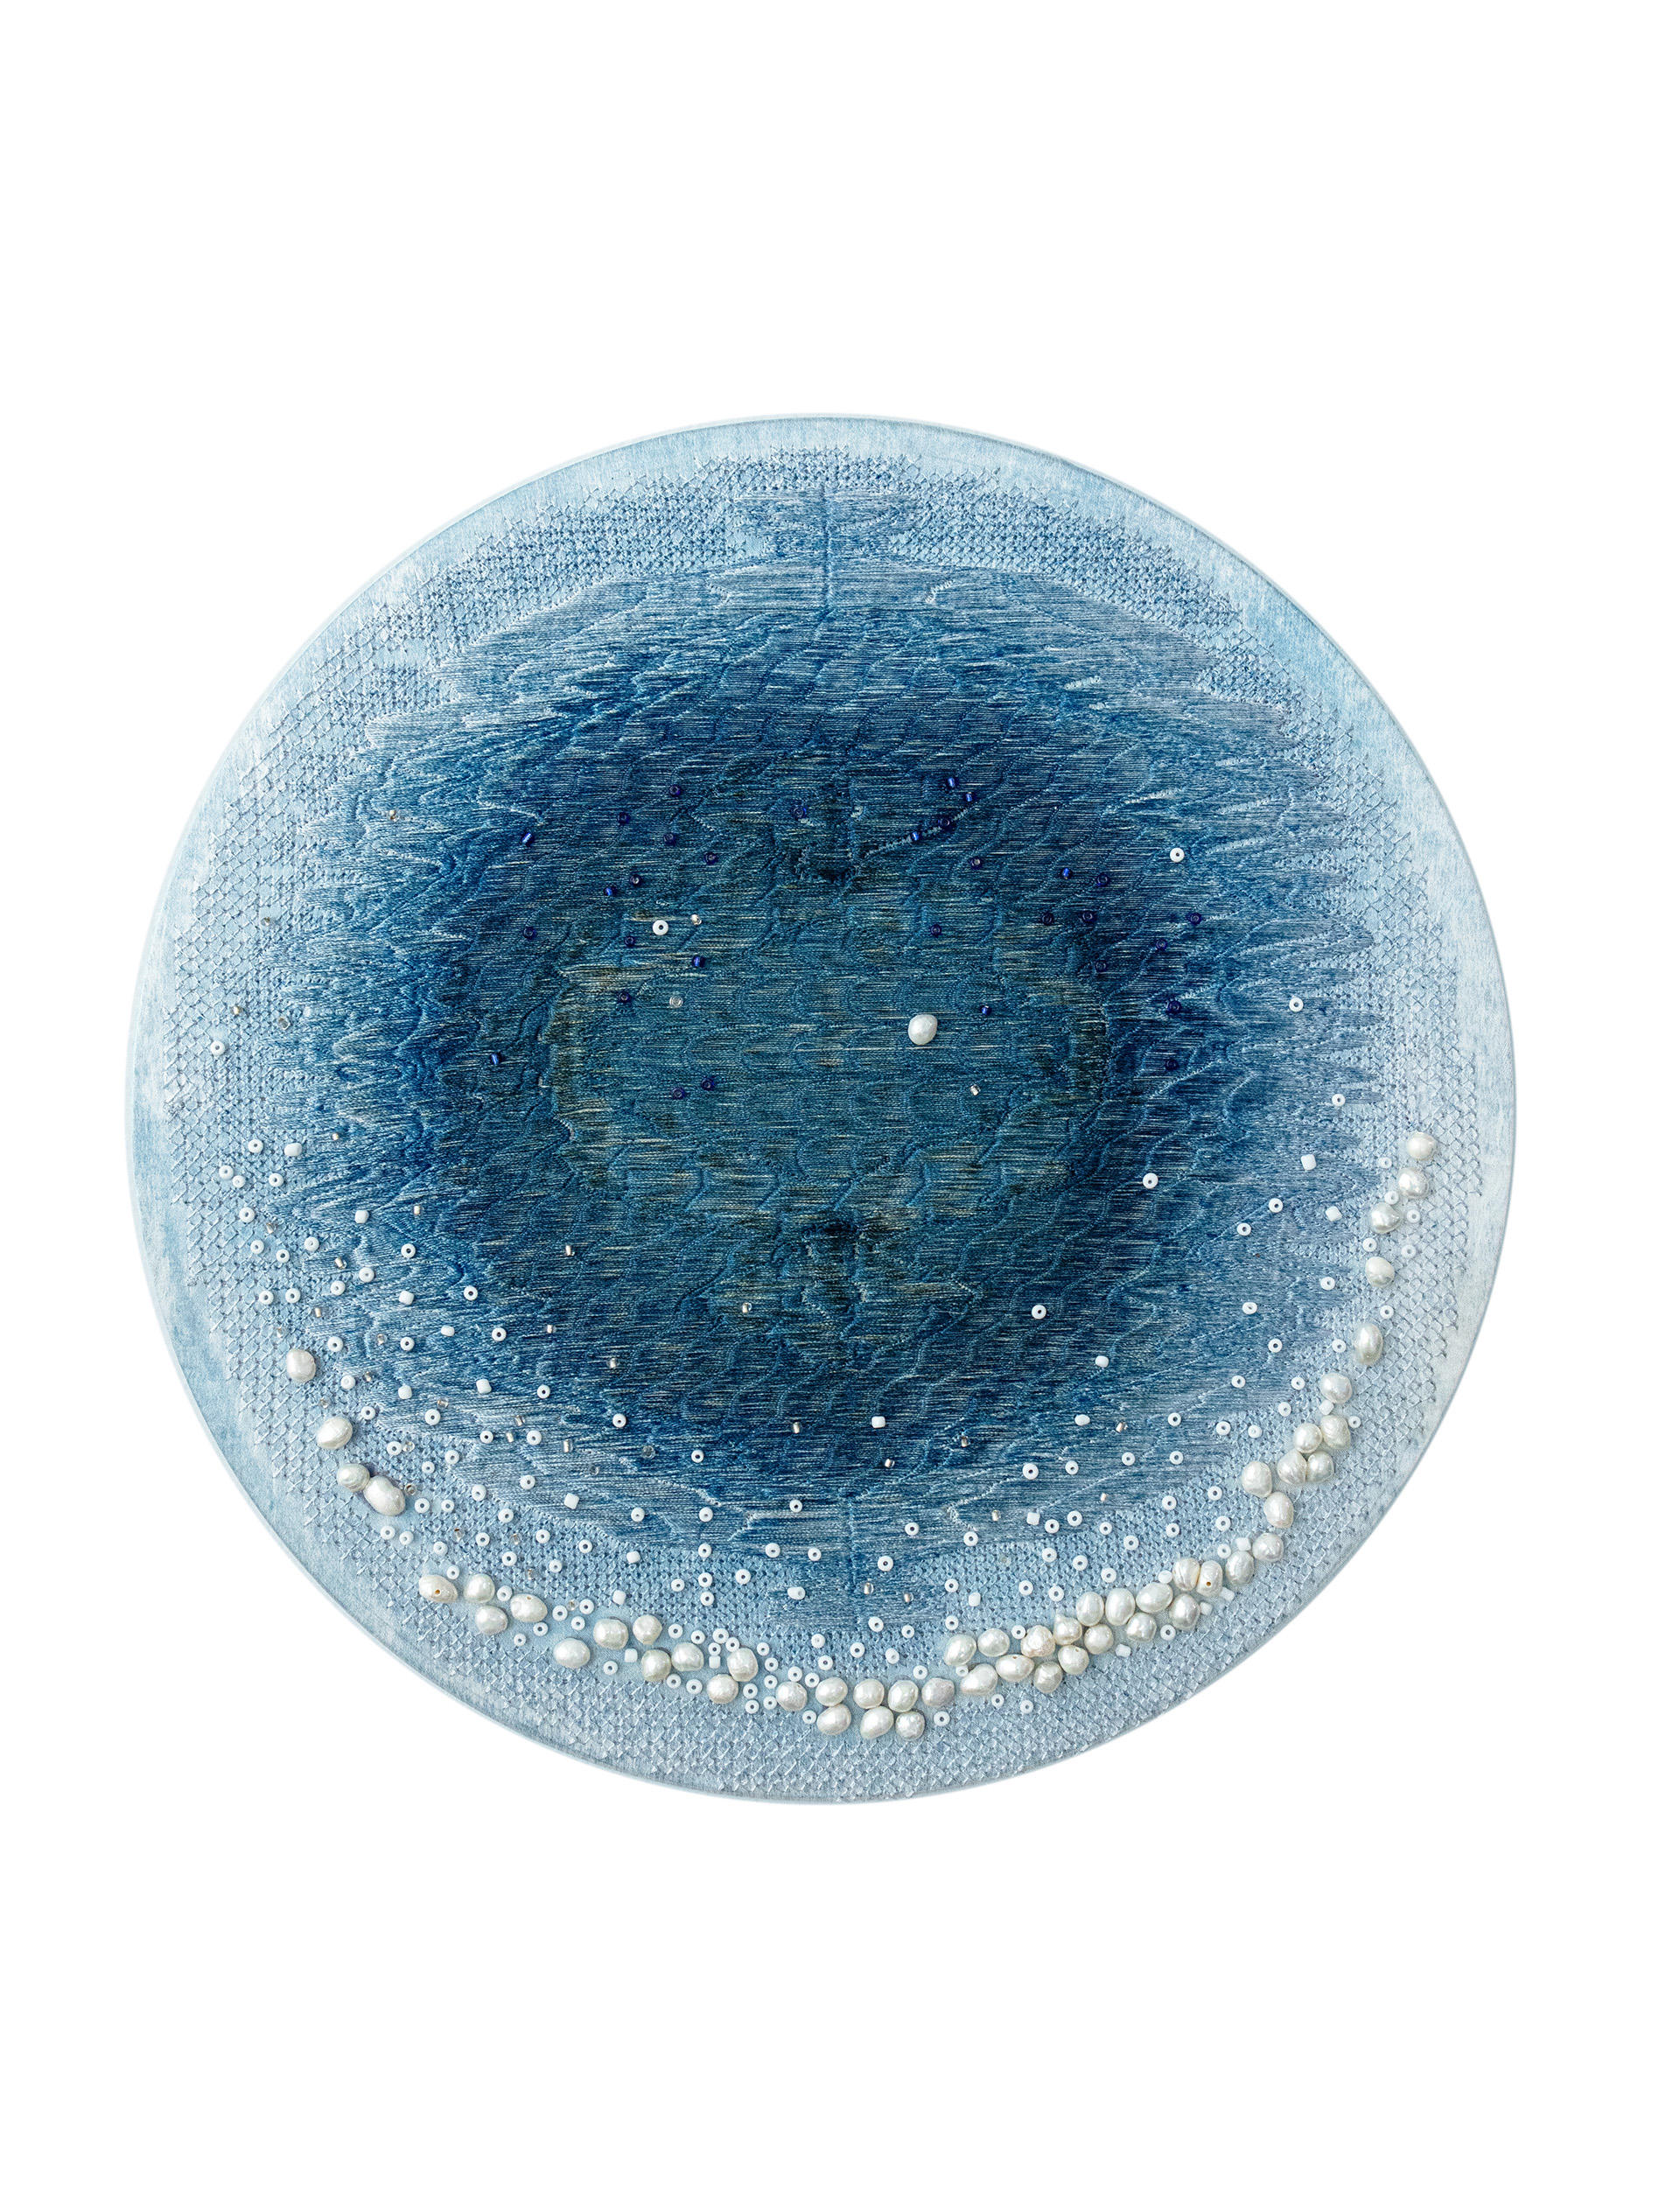 On a silk dyed light blue, I used embroidery and beadwork to create a pattern similar to the blue hole of the ocean.